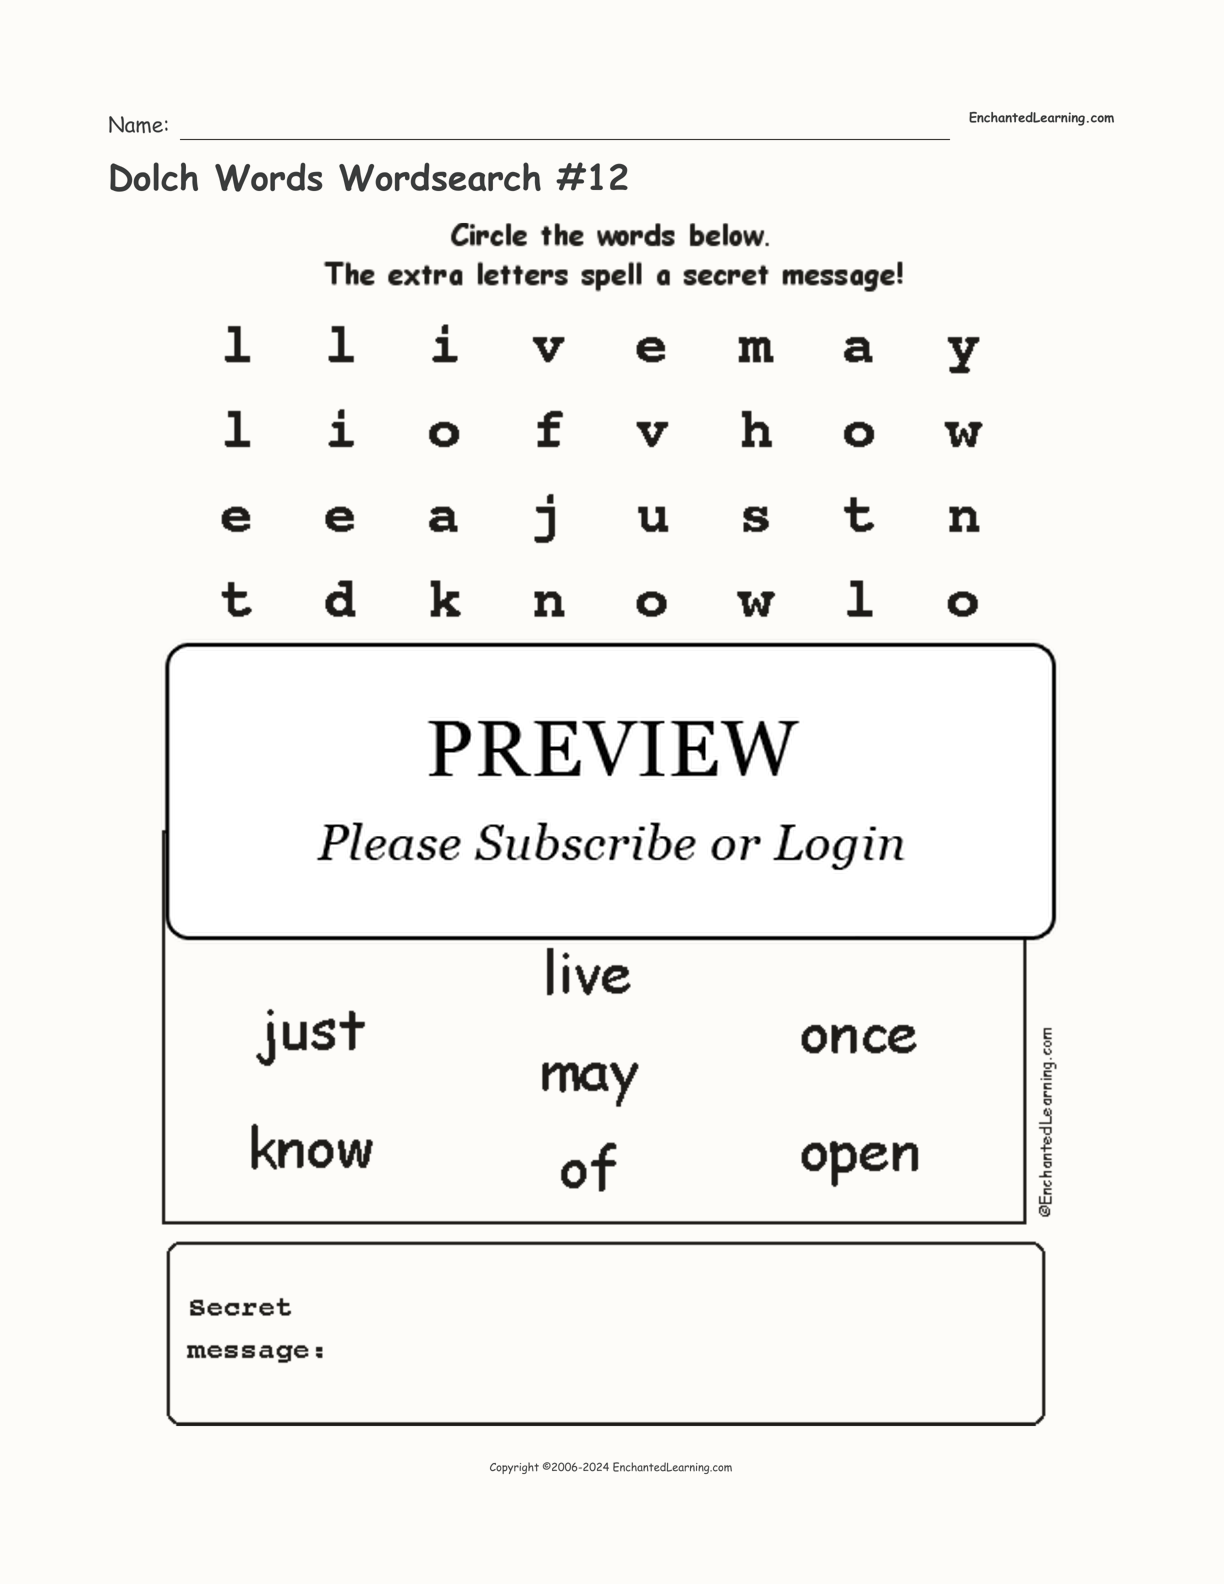 Dolch Words Wordsearch #12 interactive worksheet page 1